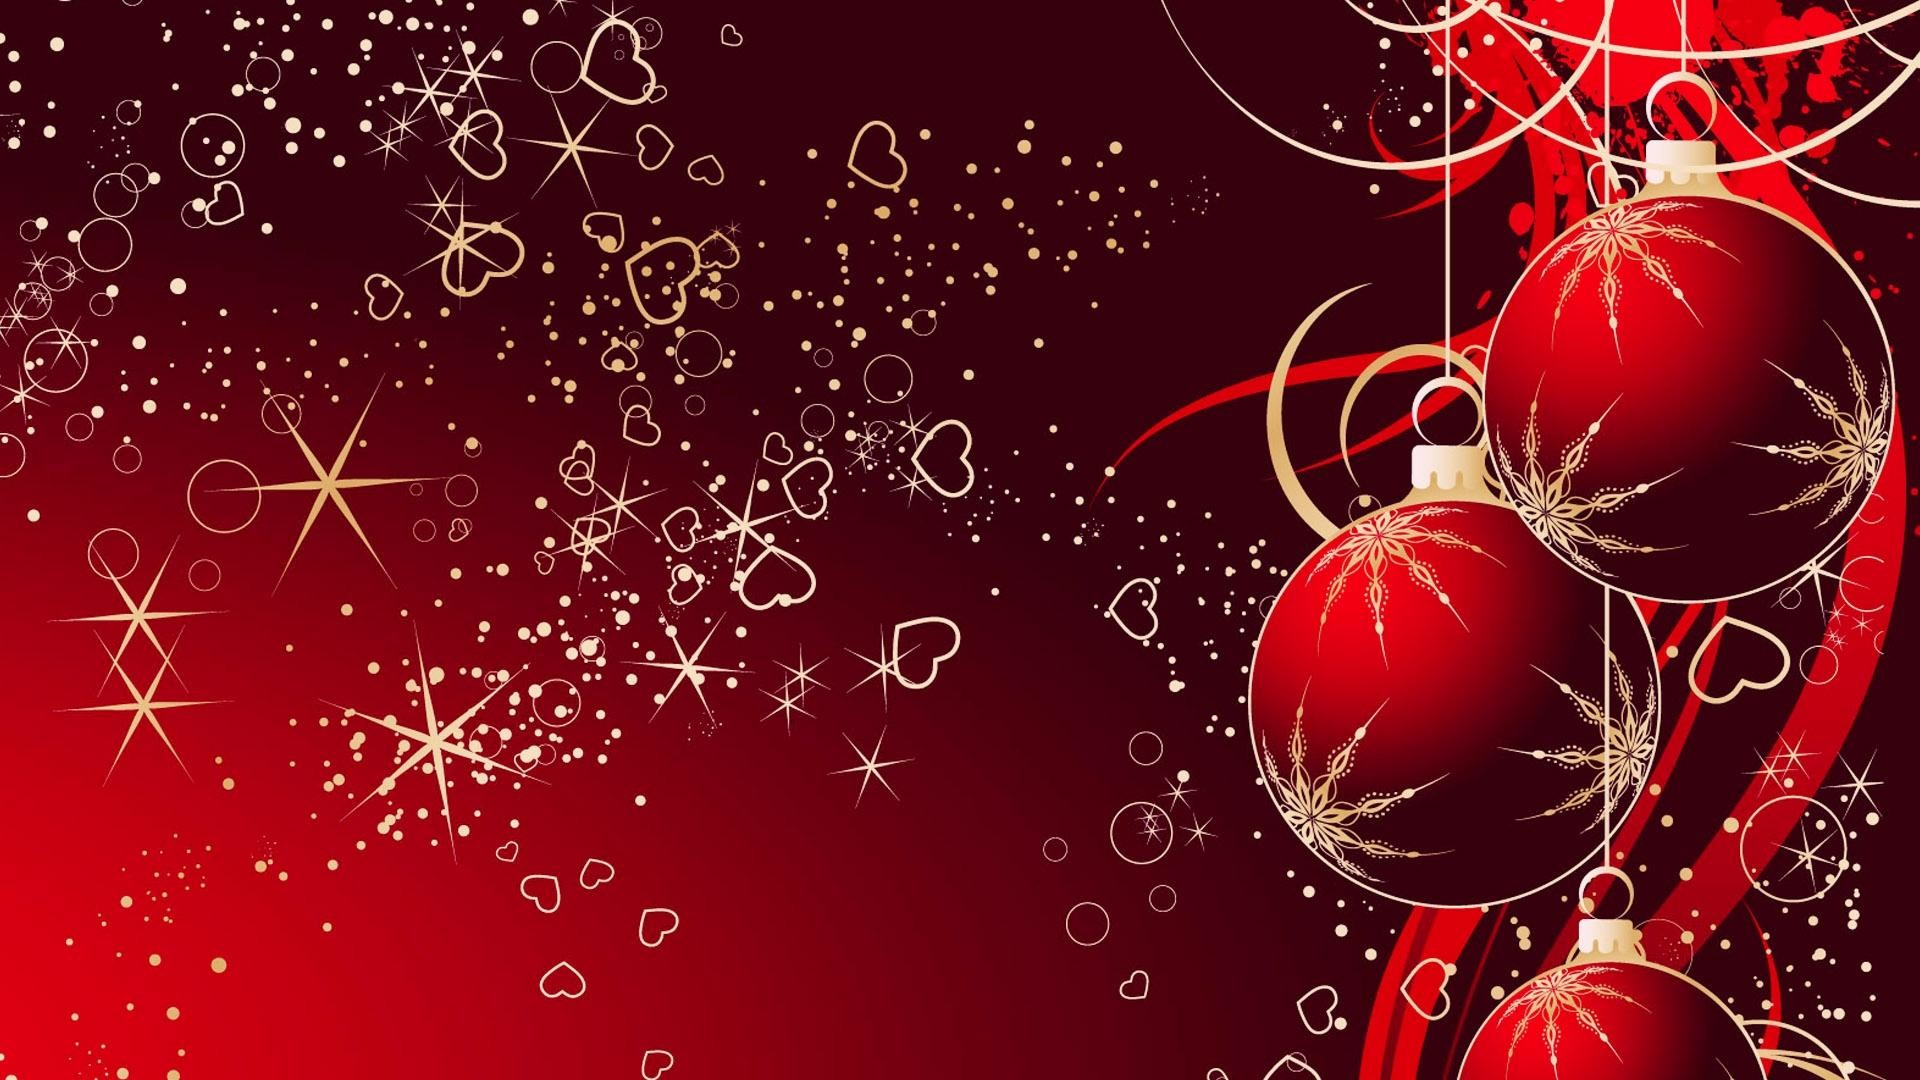 1920x1080 7. free-christmas-wallpaper-for-android7-600x338